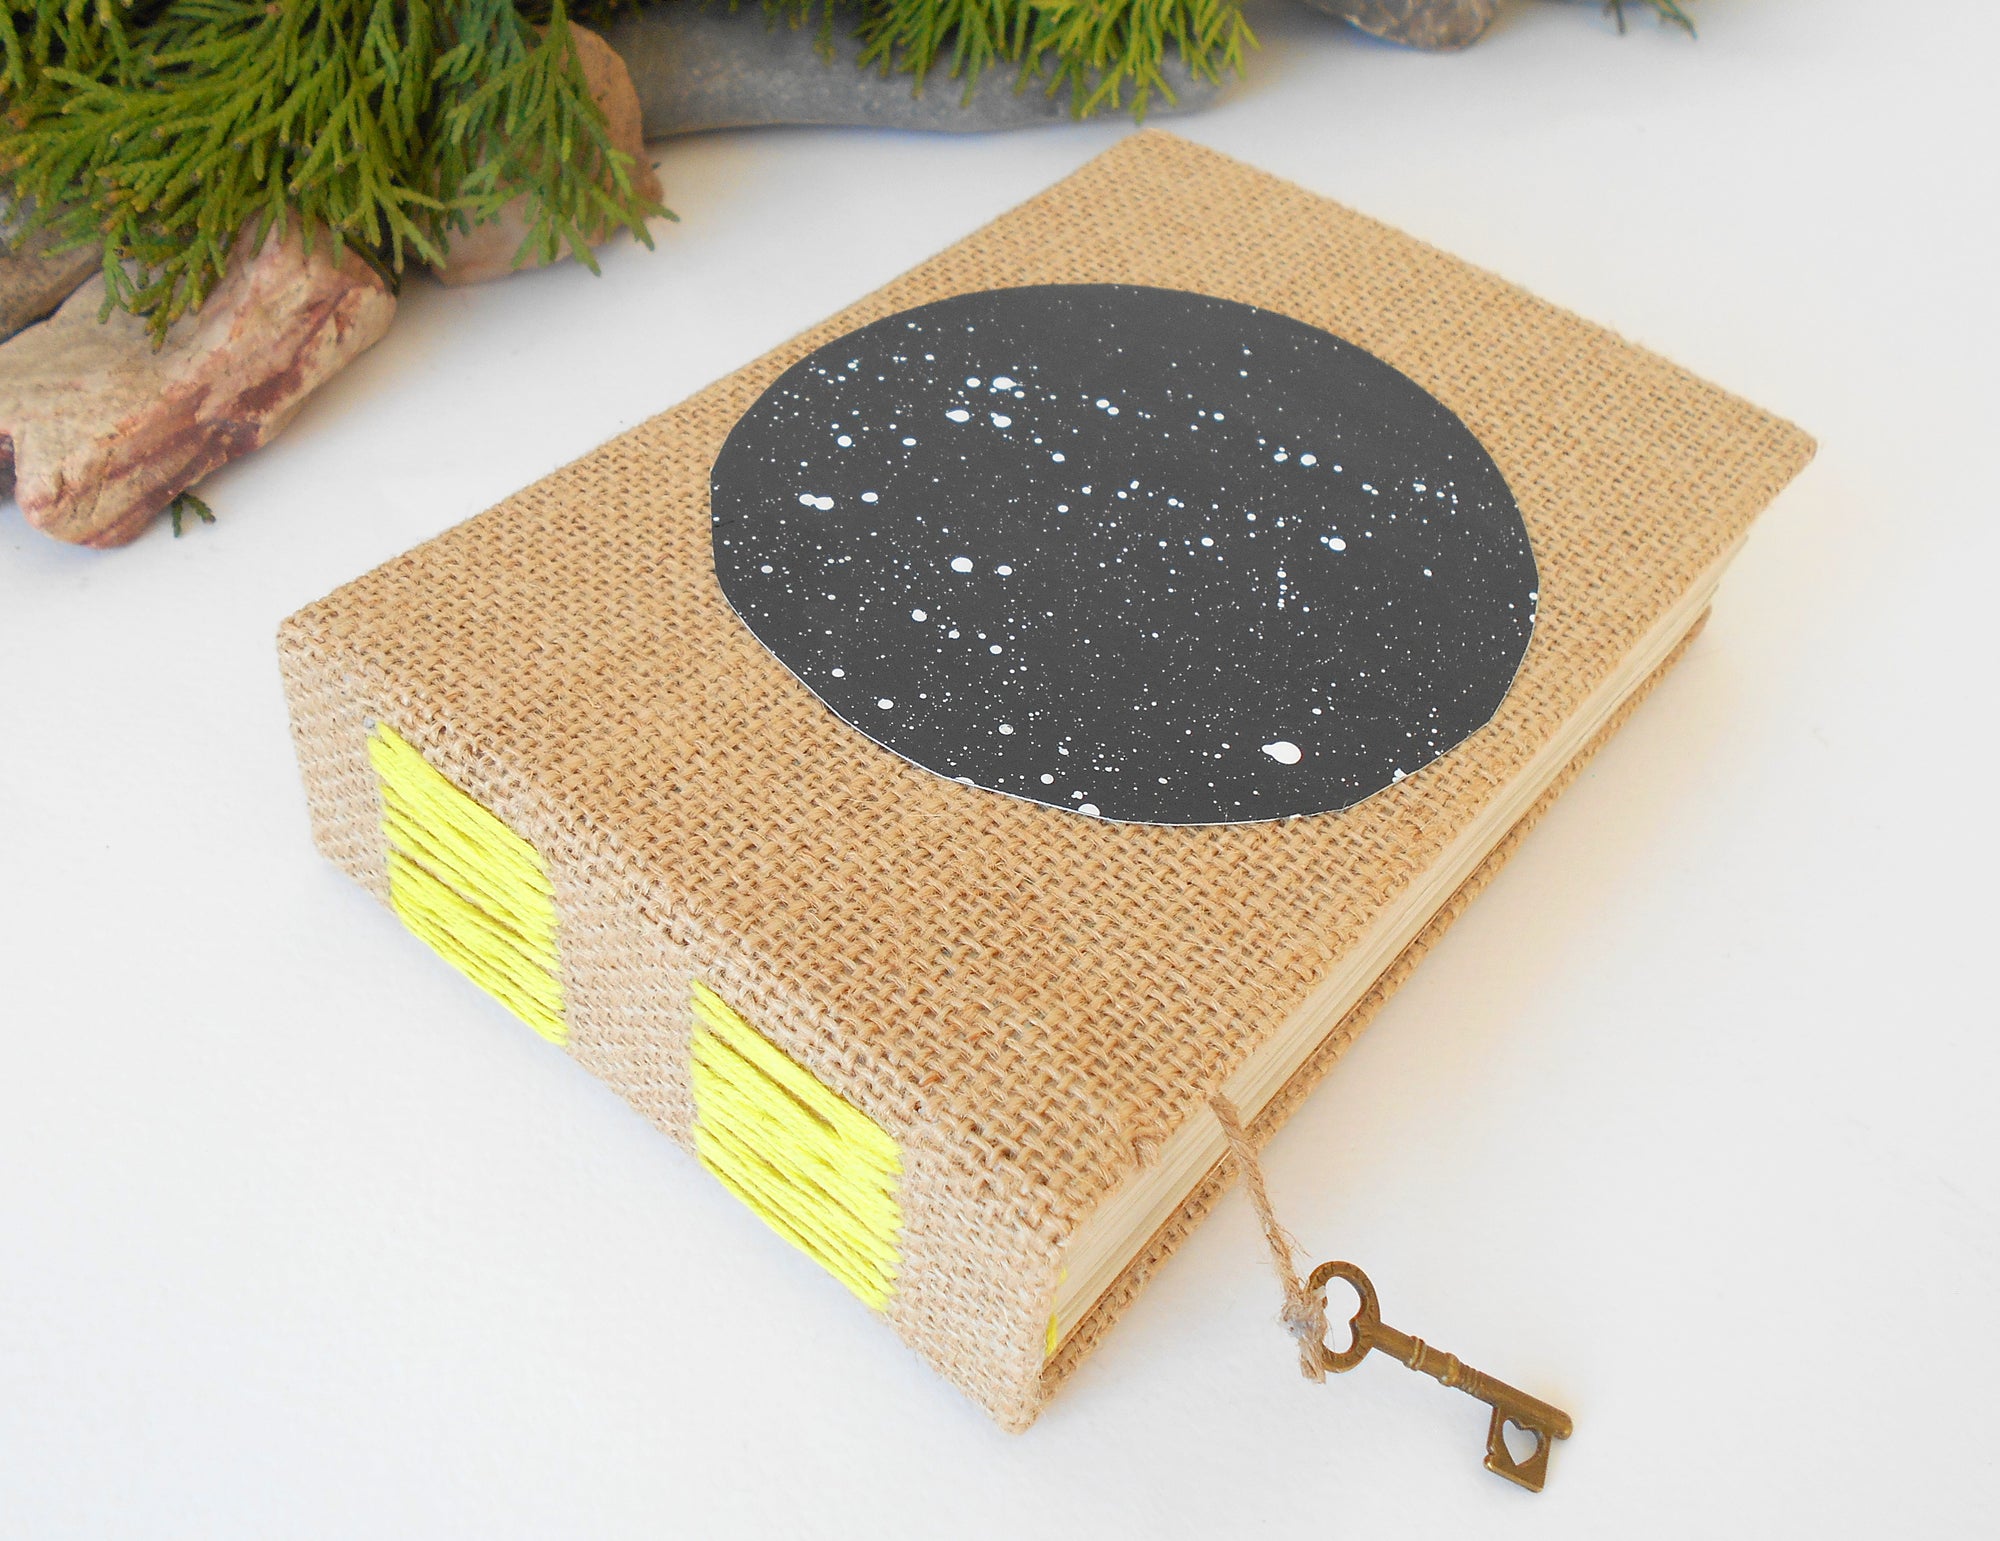  Travel sketchbook with hardcovers and 100% recycled pages and a star sky hand-painted acrylic art circle that I made. It can be used as a wedding book for a rustic wedding.